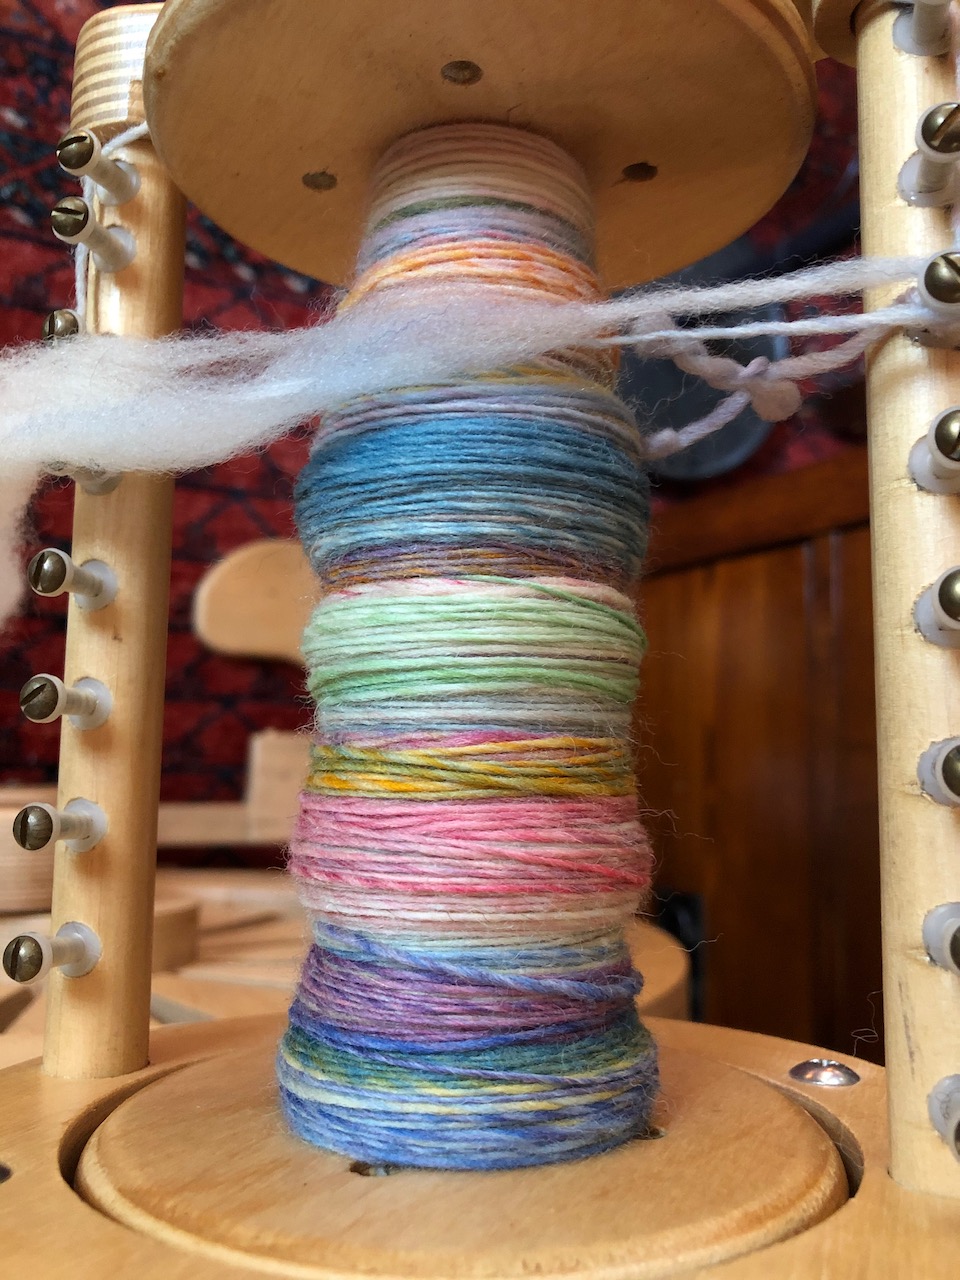 Unplied singles (Merino and/or Columbia, hand-dyed)